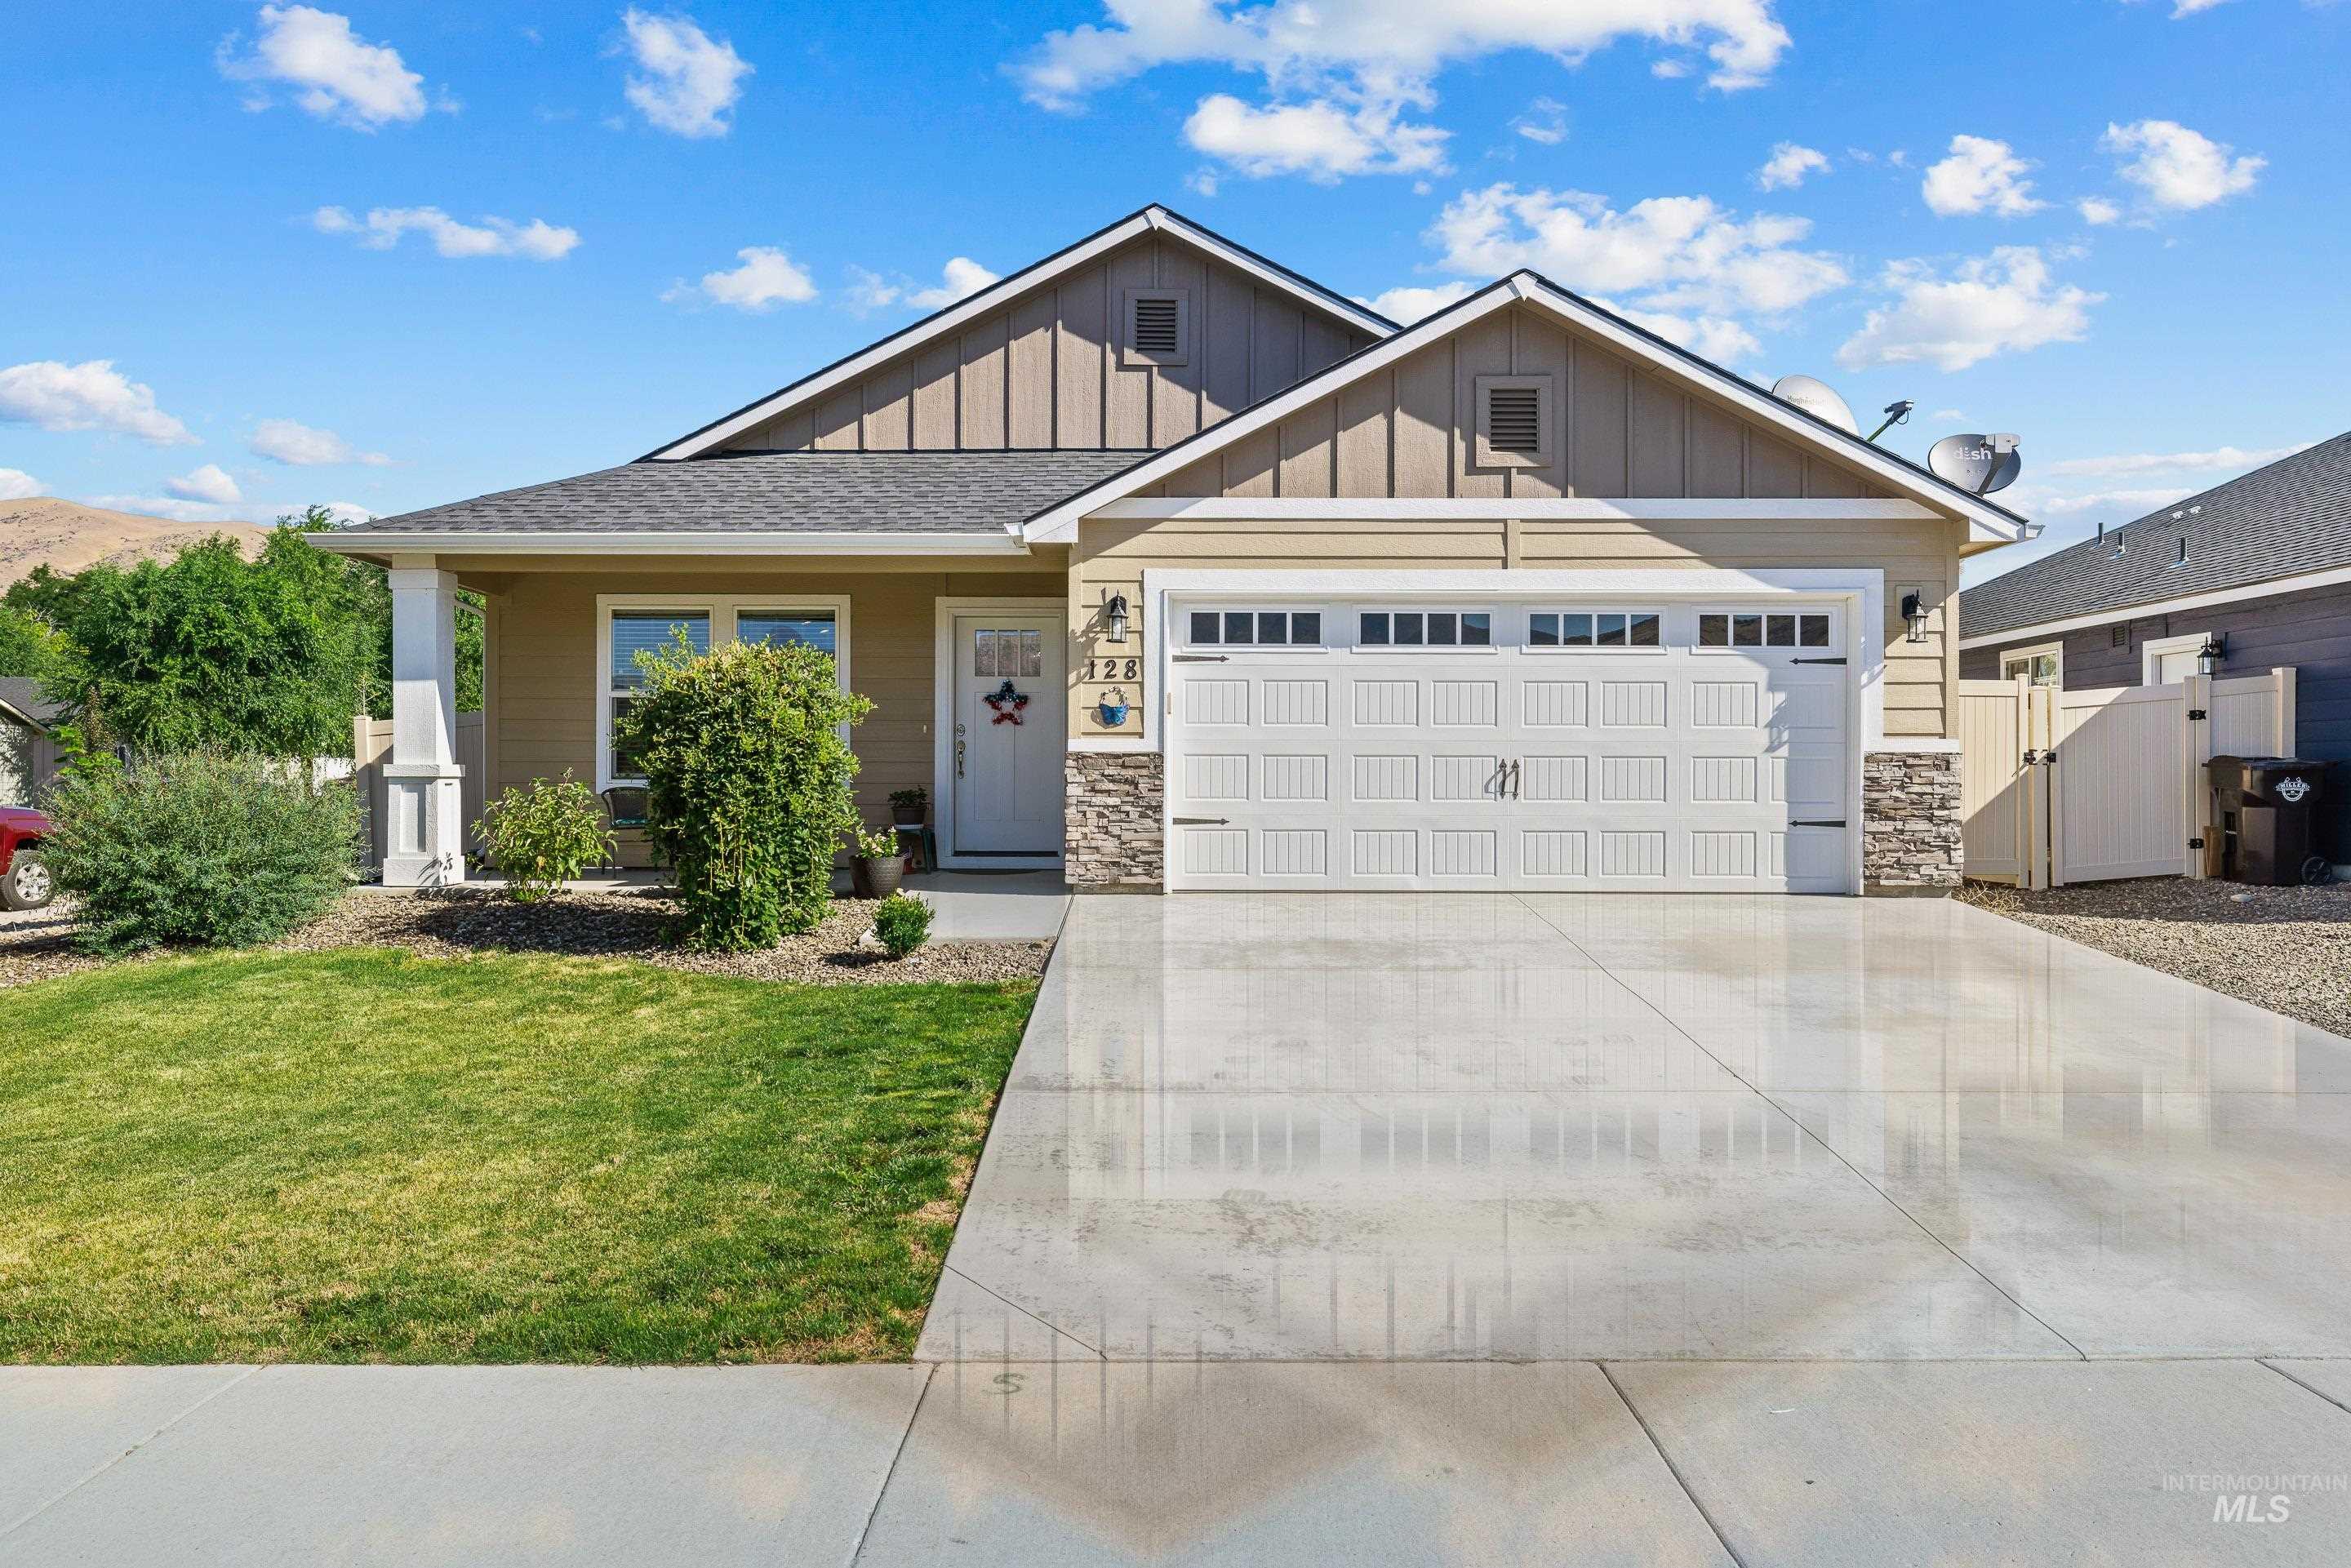 128 Ada St, Horseshoe Bend, Idaho 83629, 3 Bedrooms, 2 Bathrooms, Residential For Sale, Price $365,000, 98855068